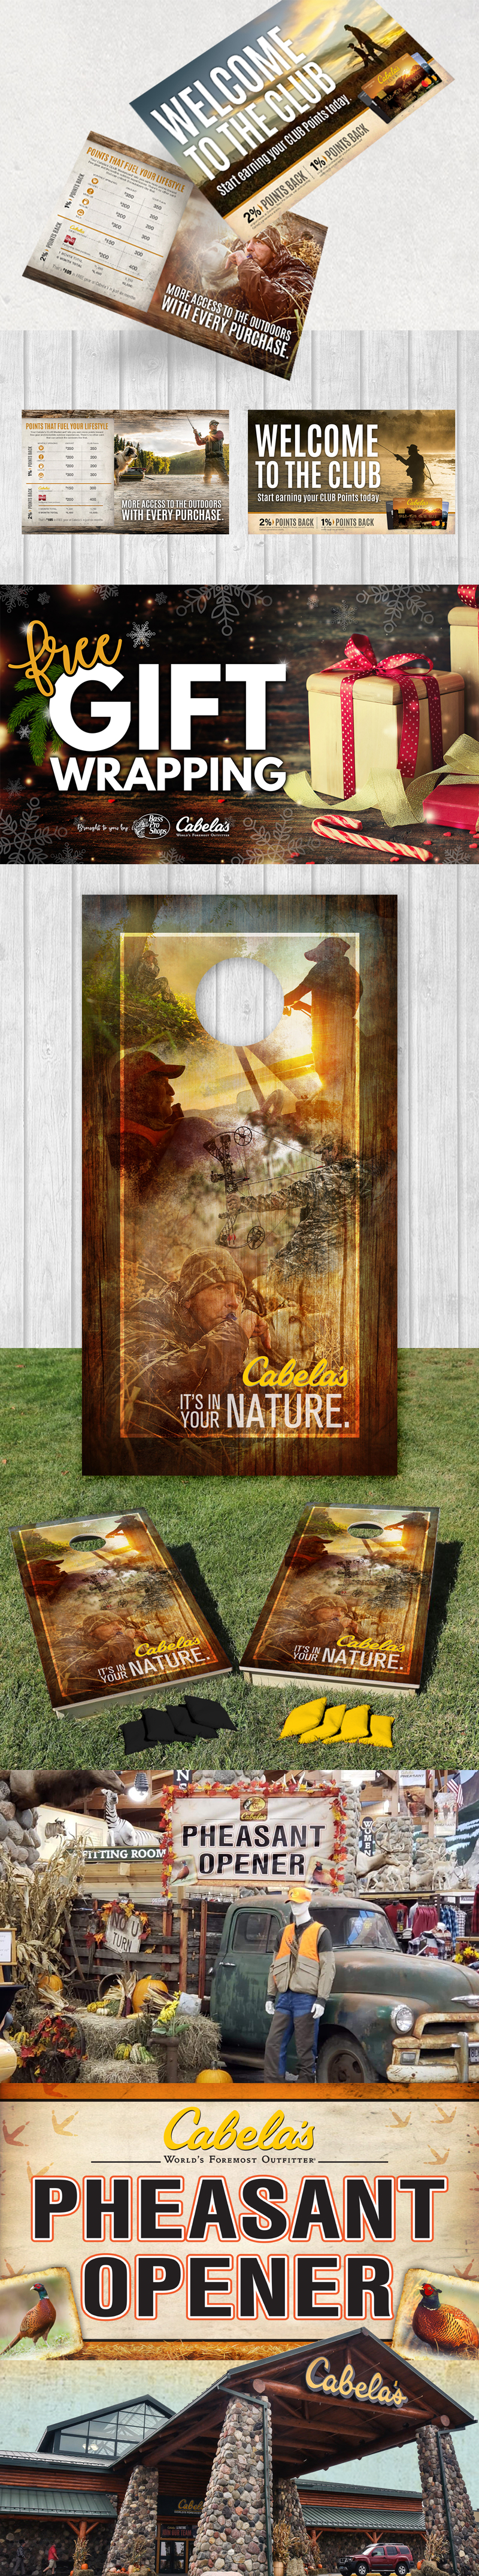 Cabela's artwork. Banners, postcards, and corn hole board